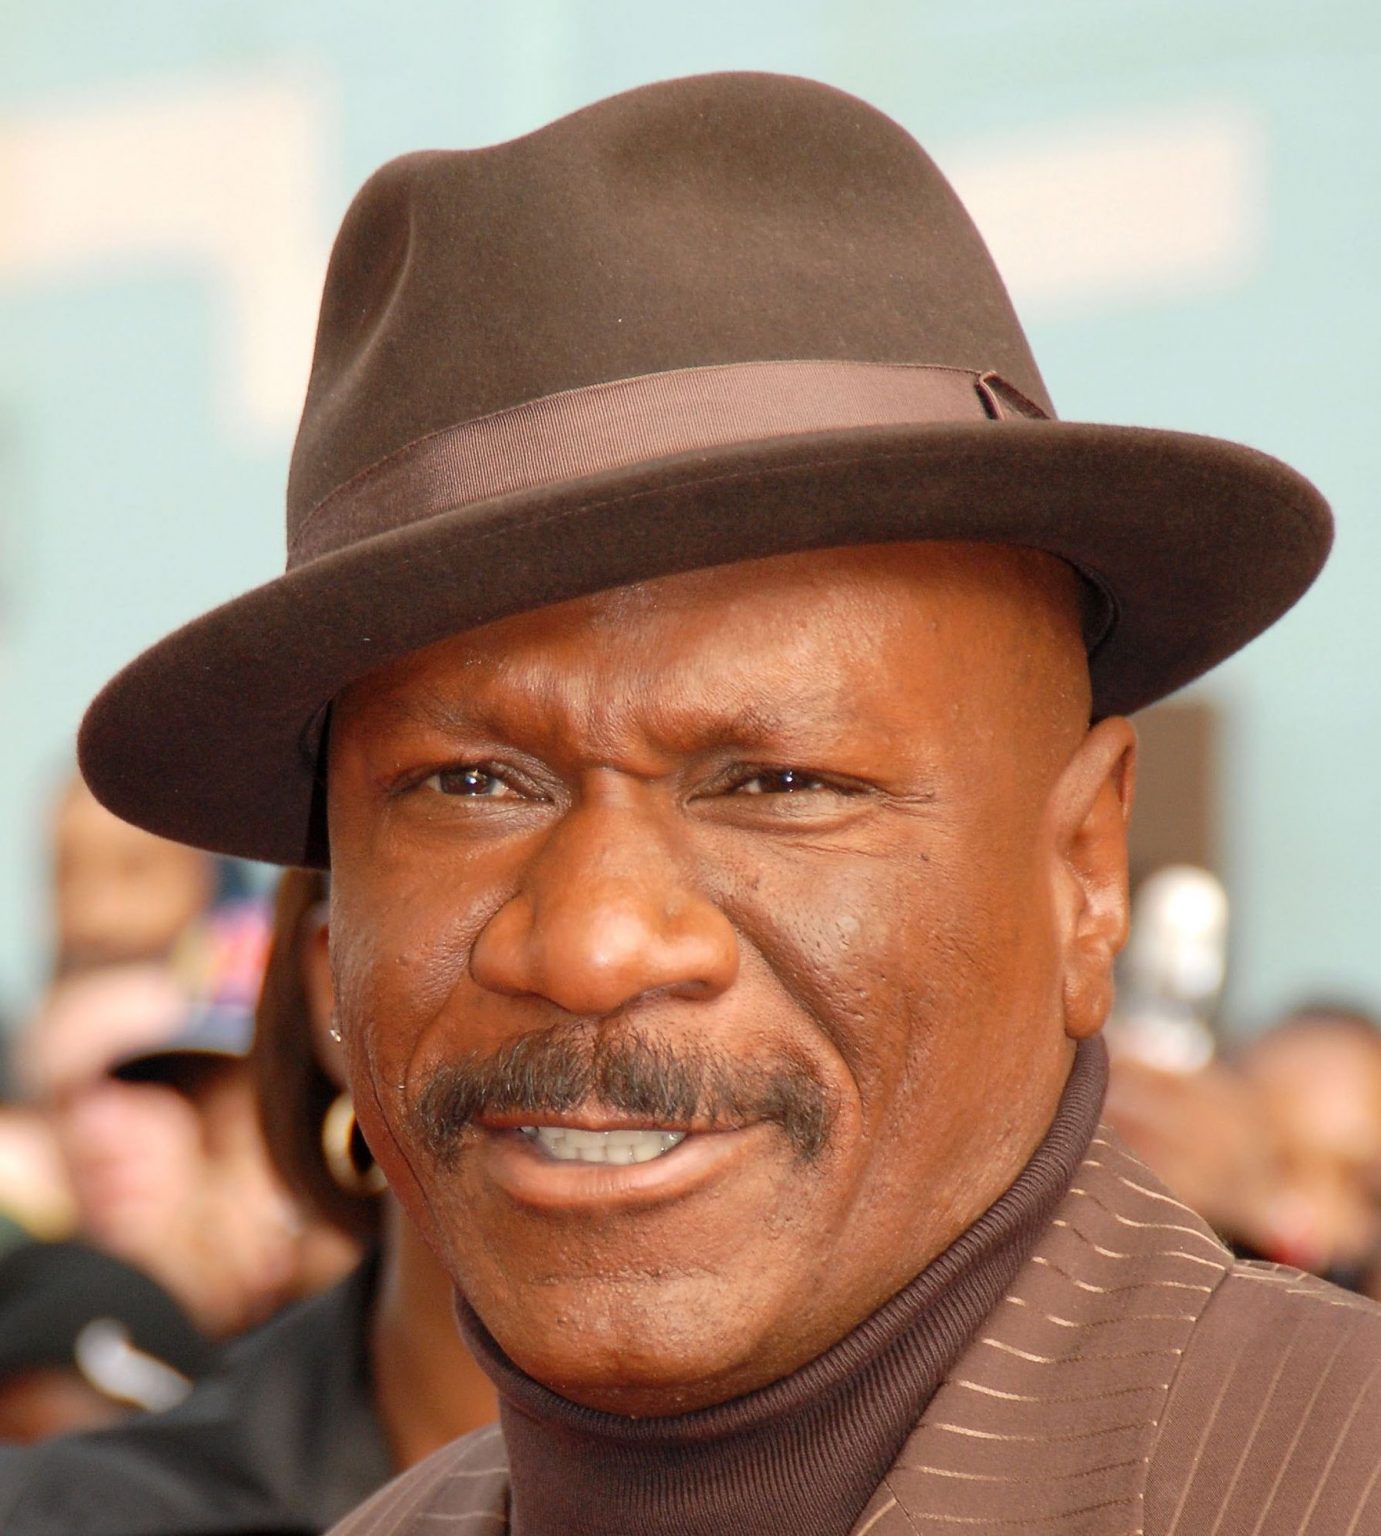 16. Marsellus Wallace’s scar was Ving Rhames' own.